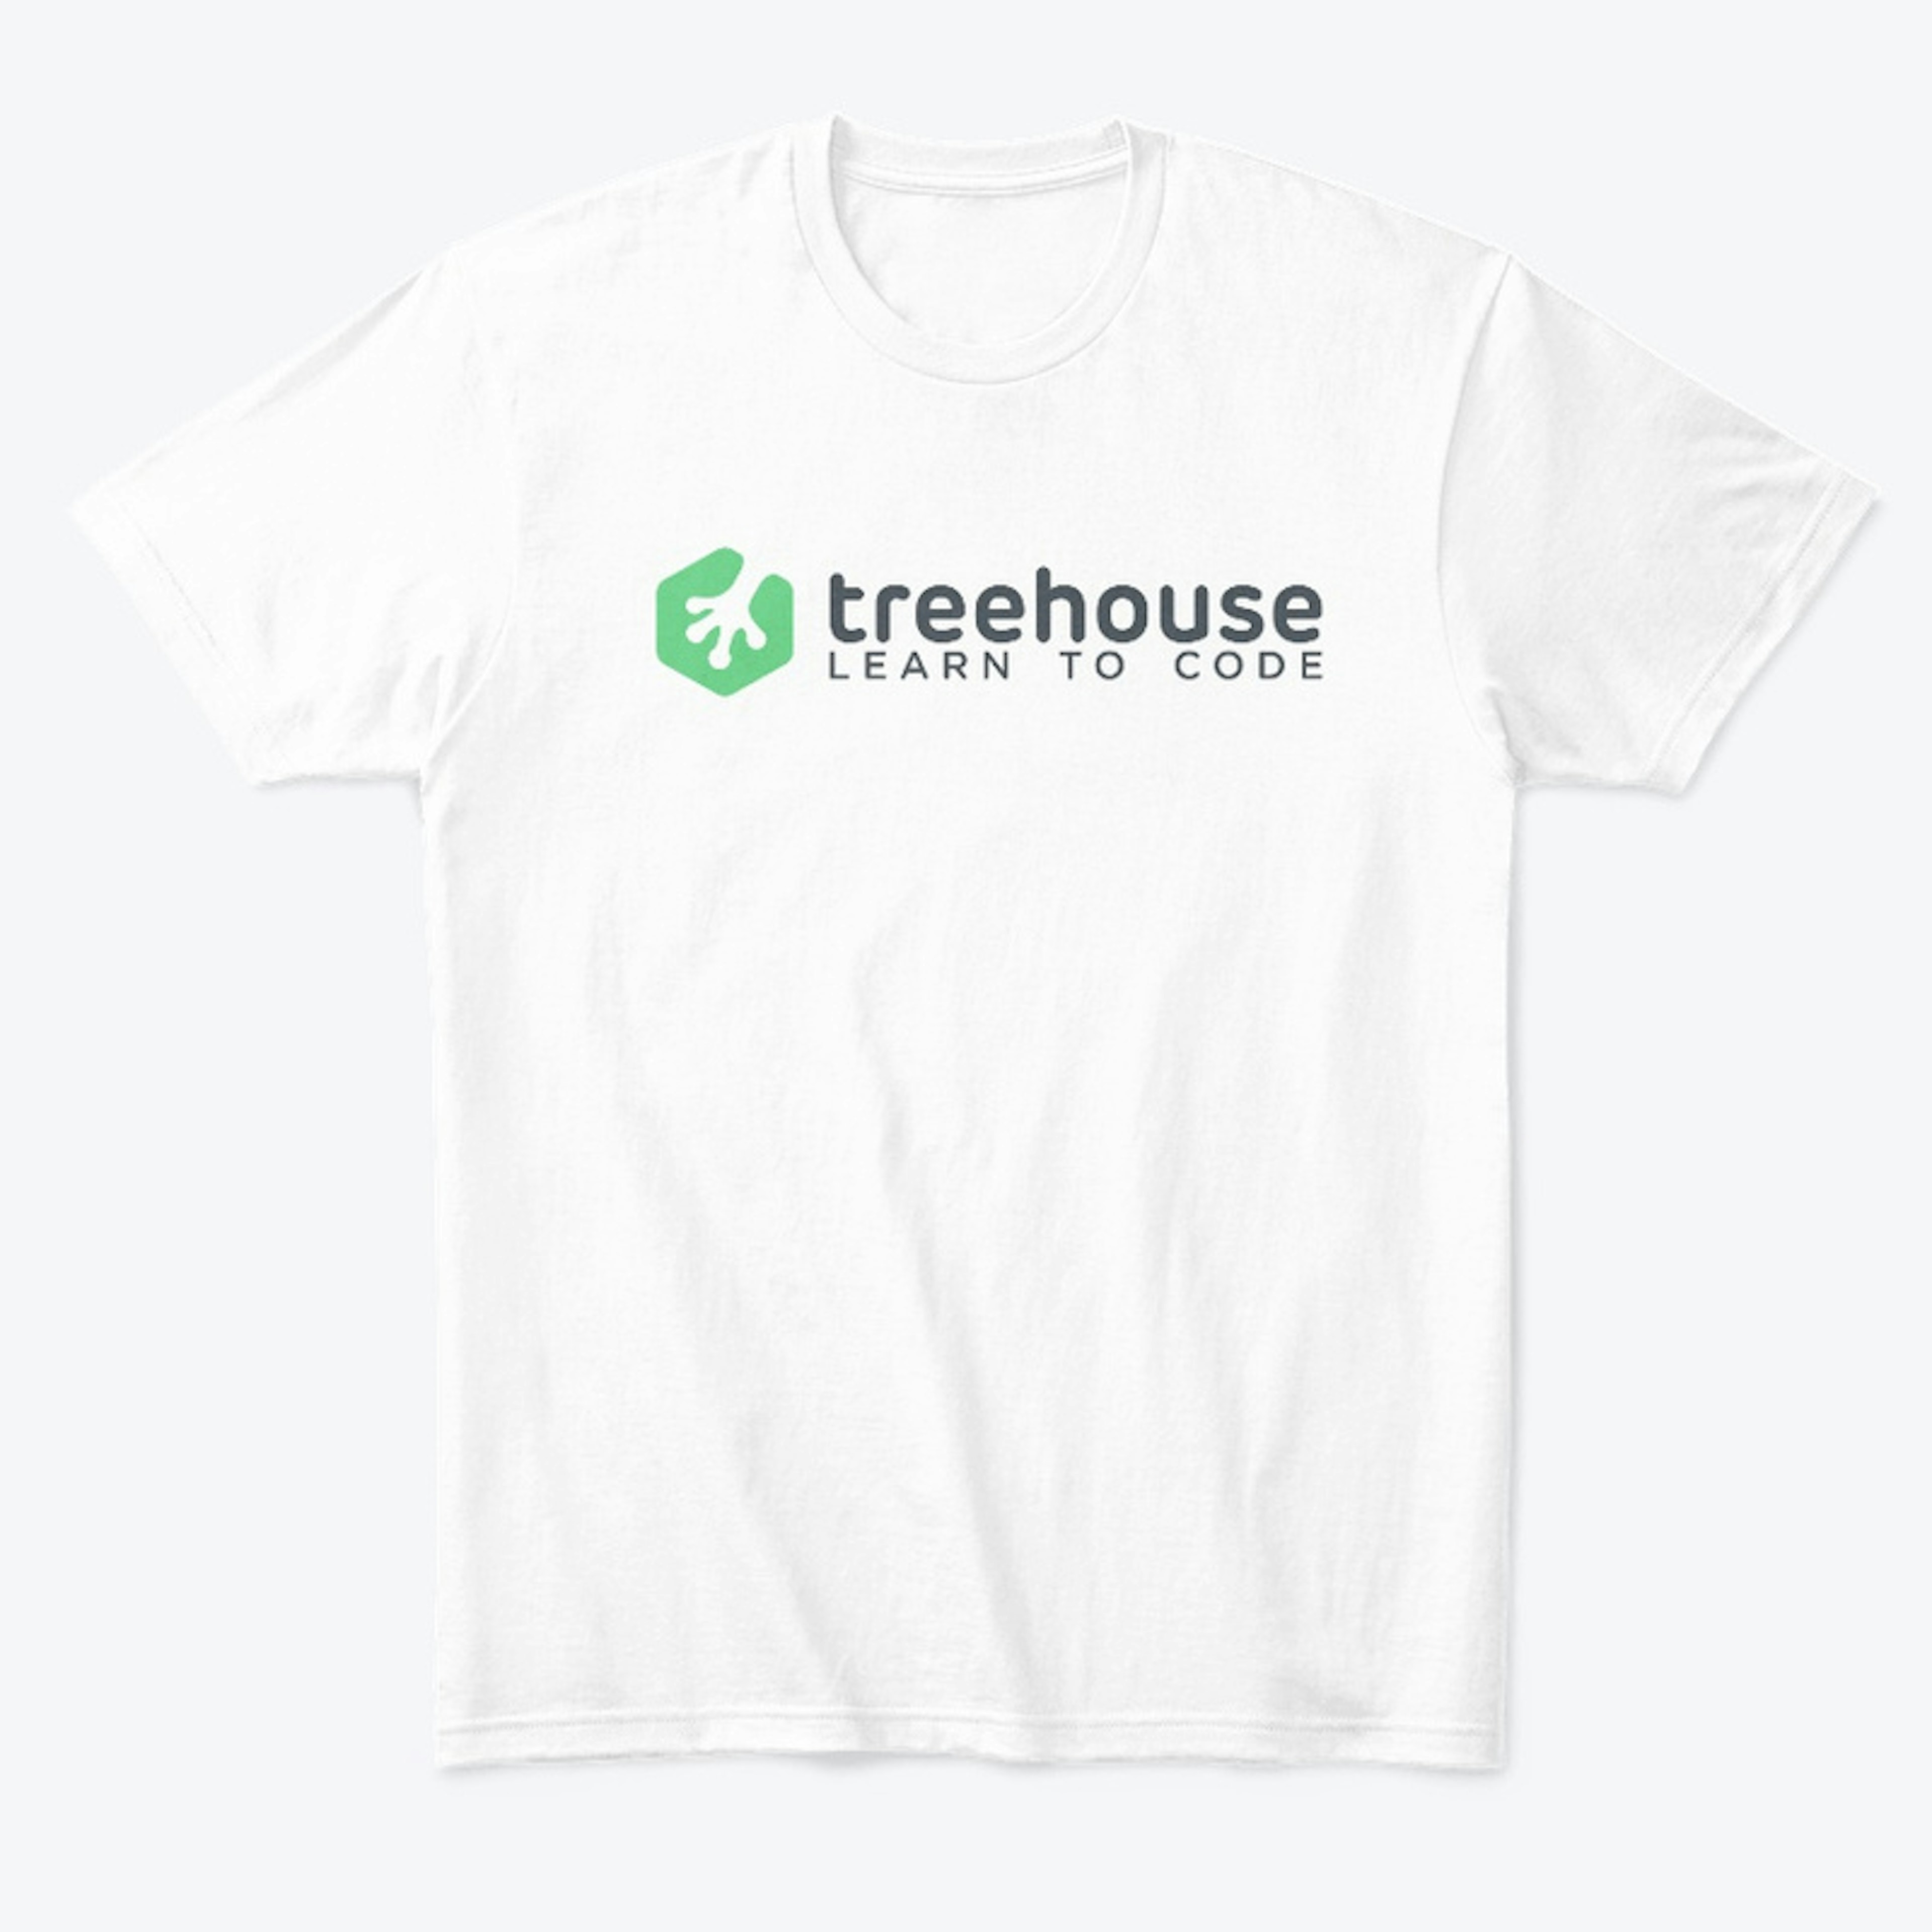 Treehouse - Learn to Code